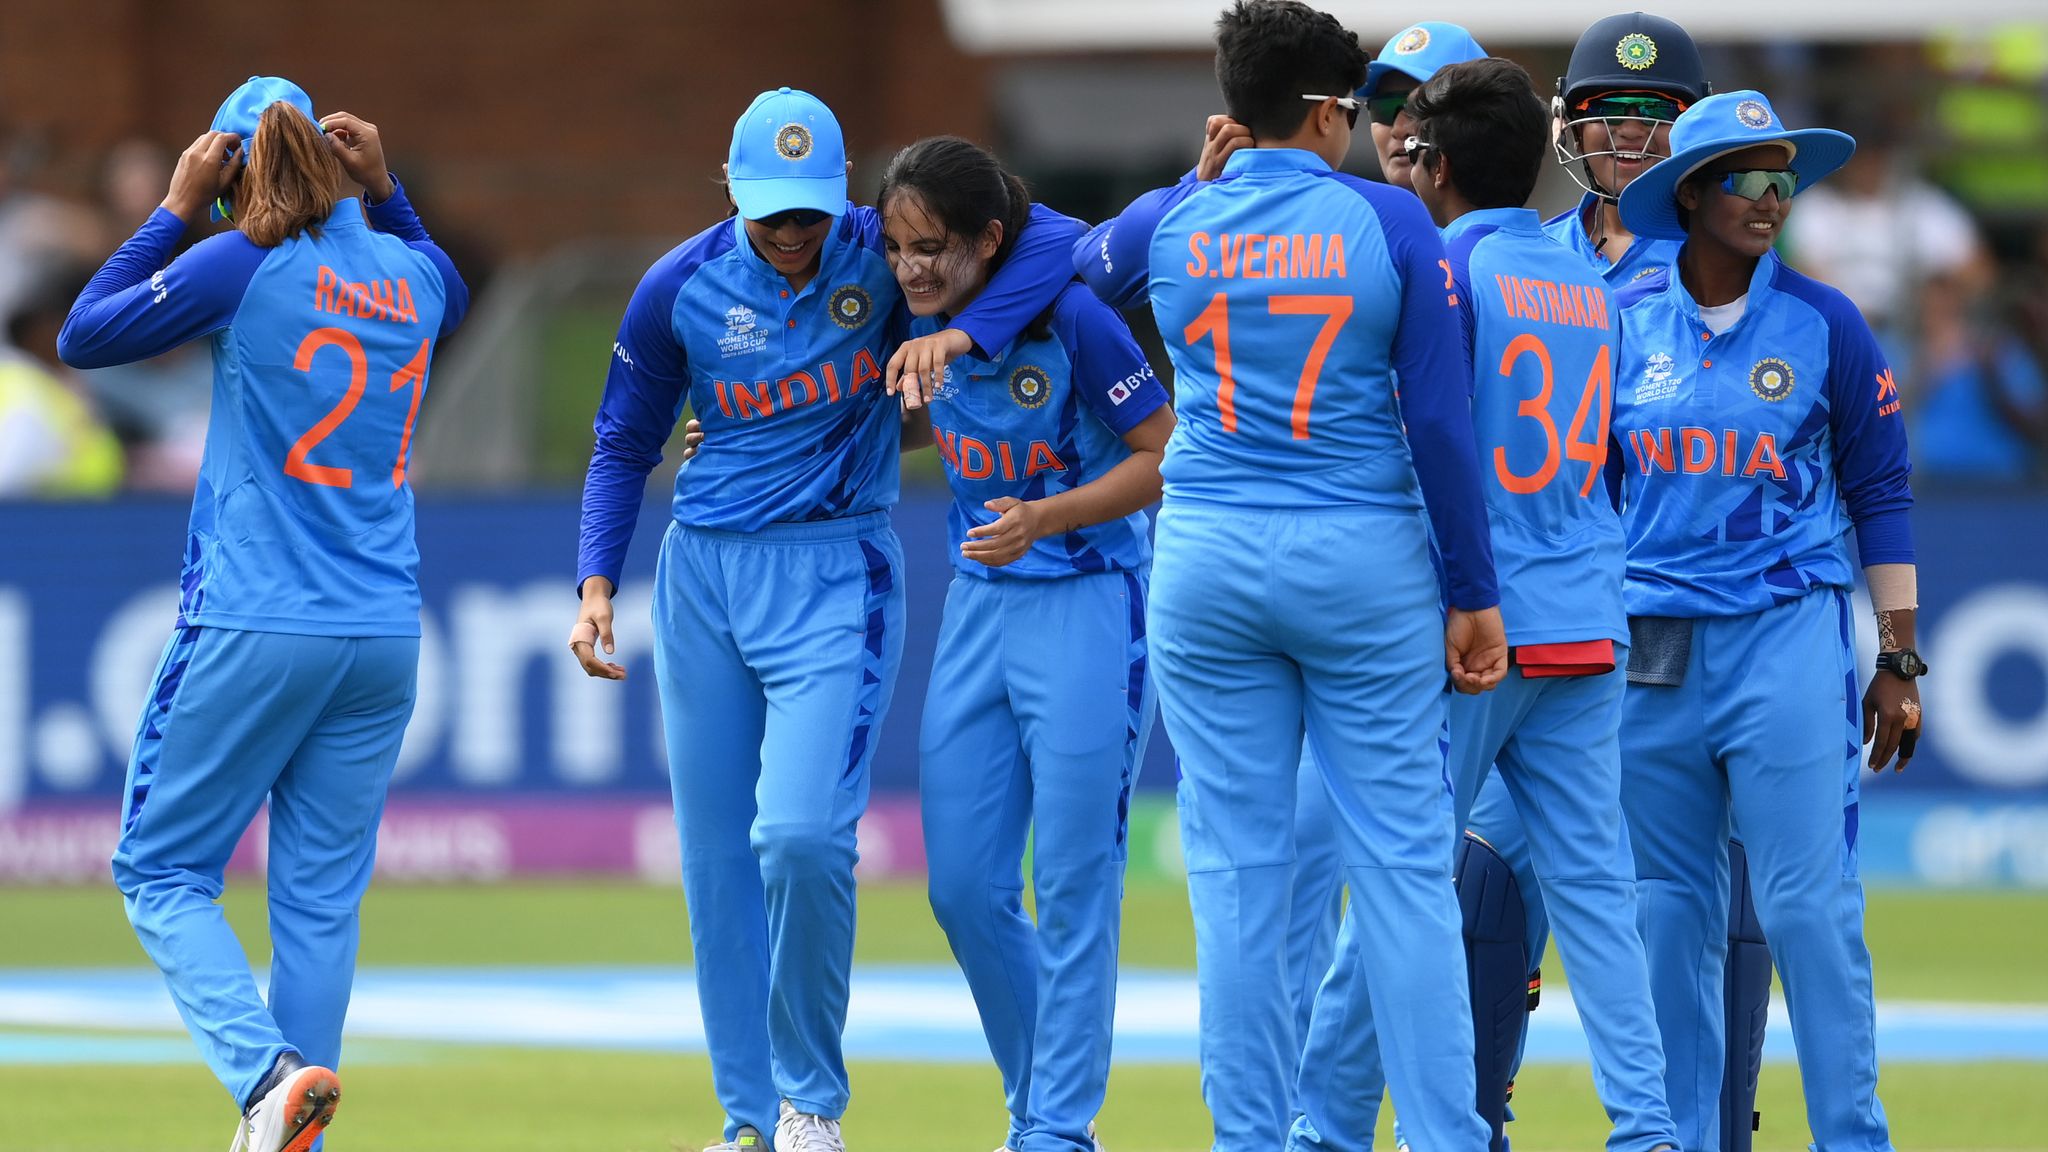 Women's T20 World Cup LIVE! Updates as England face India with chance to  close on semi-final spot | Cricket News | Sky Sports